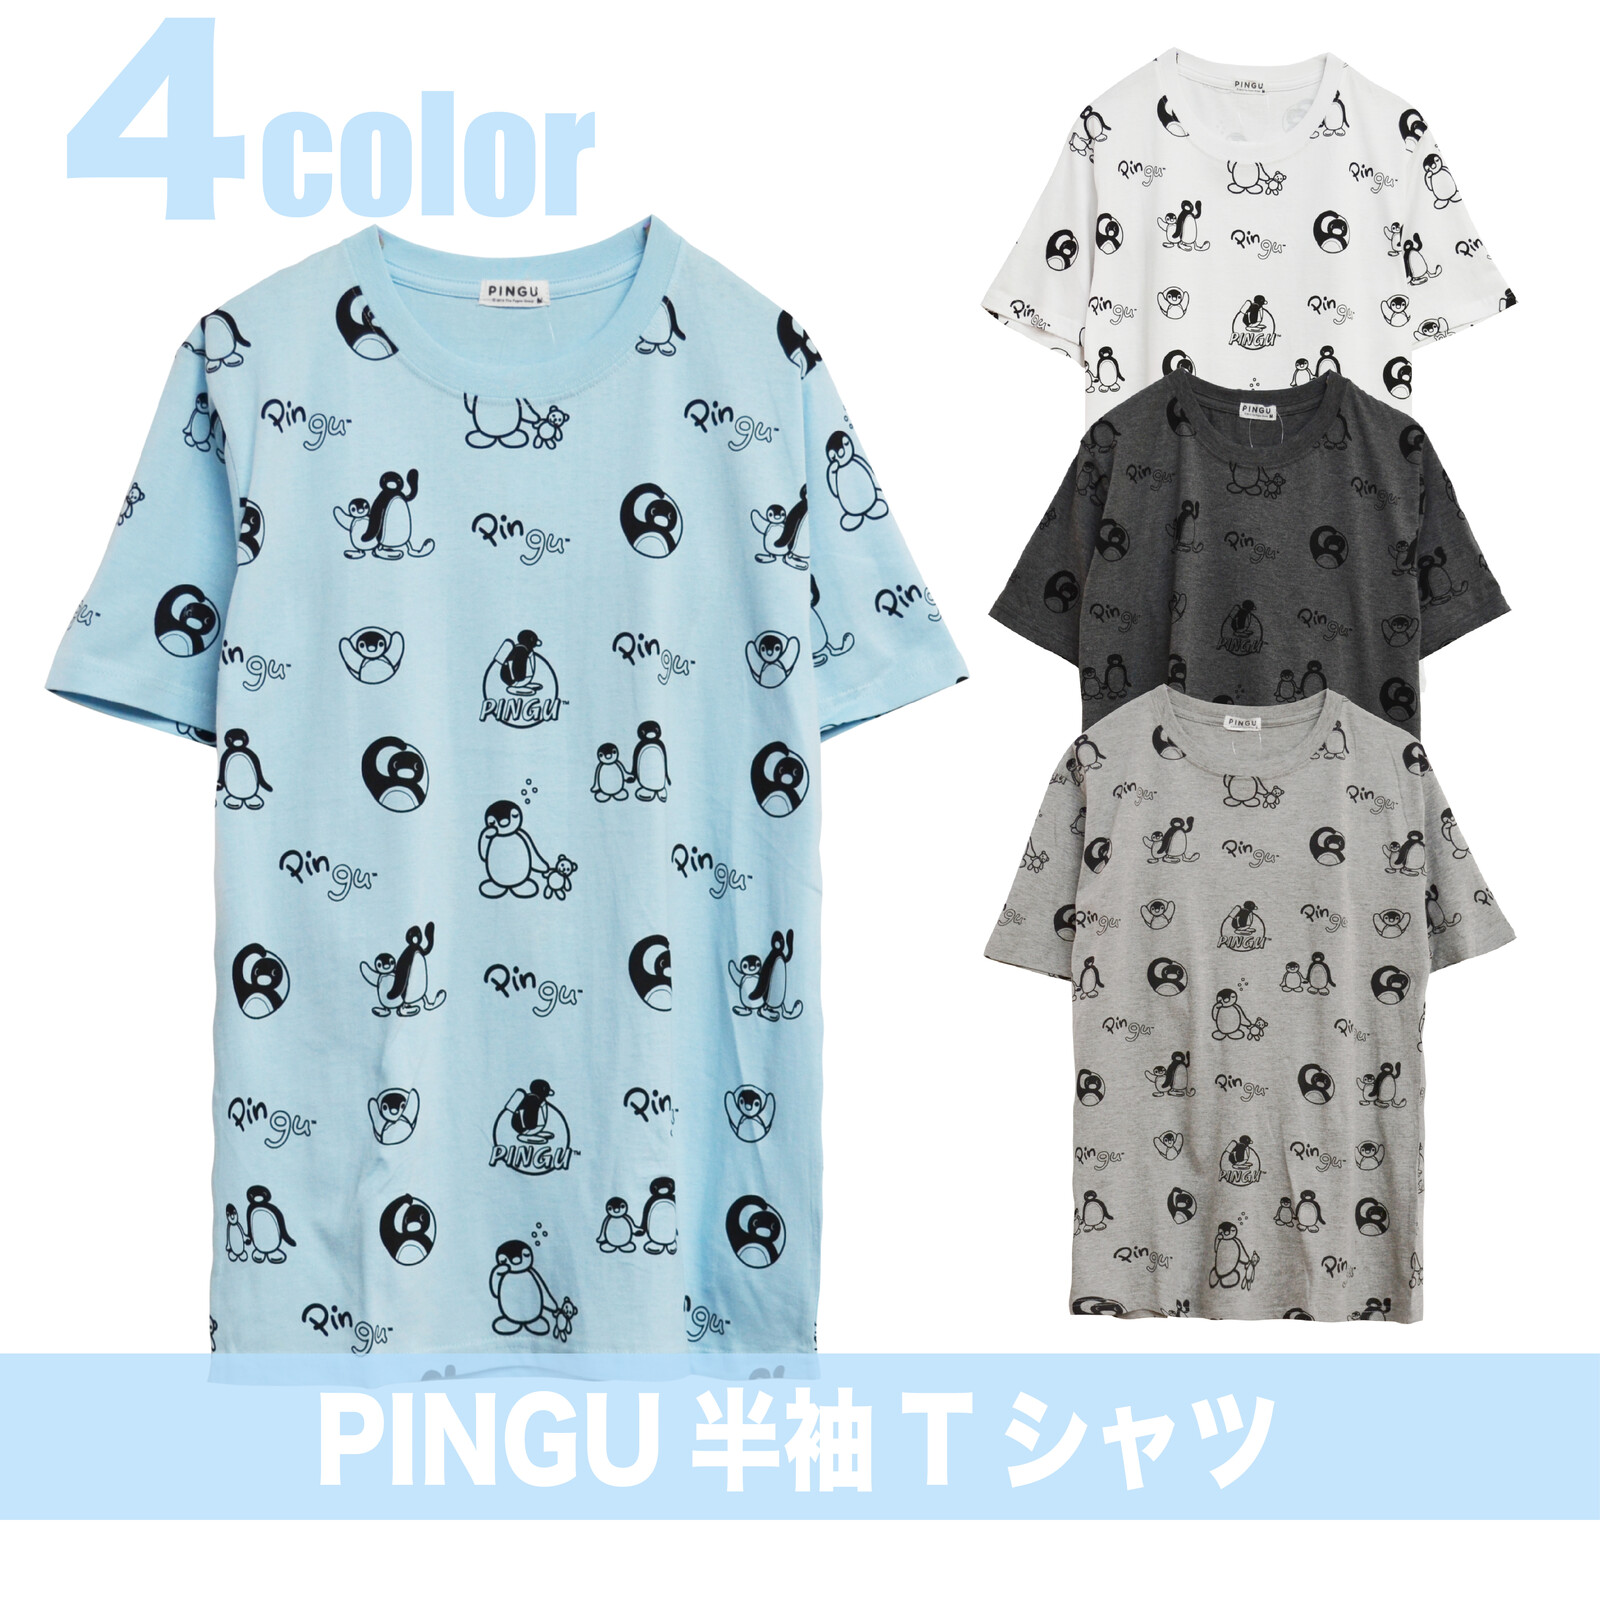 Pingu Short Sleeve T Shirt Export Japanese Products To The World At Wholesale Prices Super Delivery